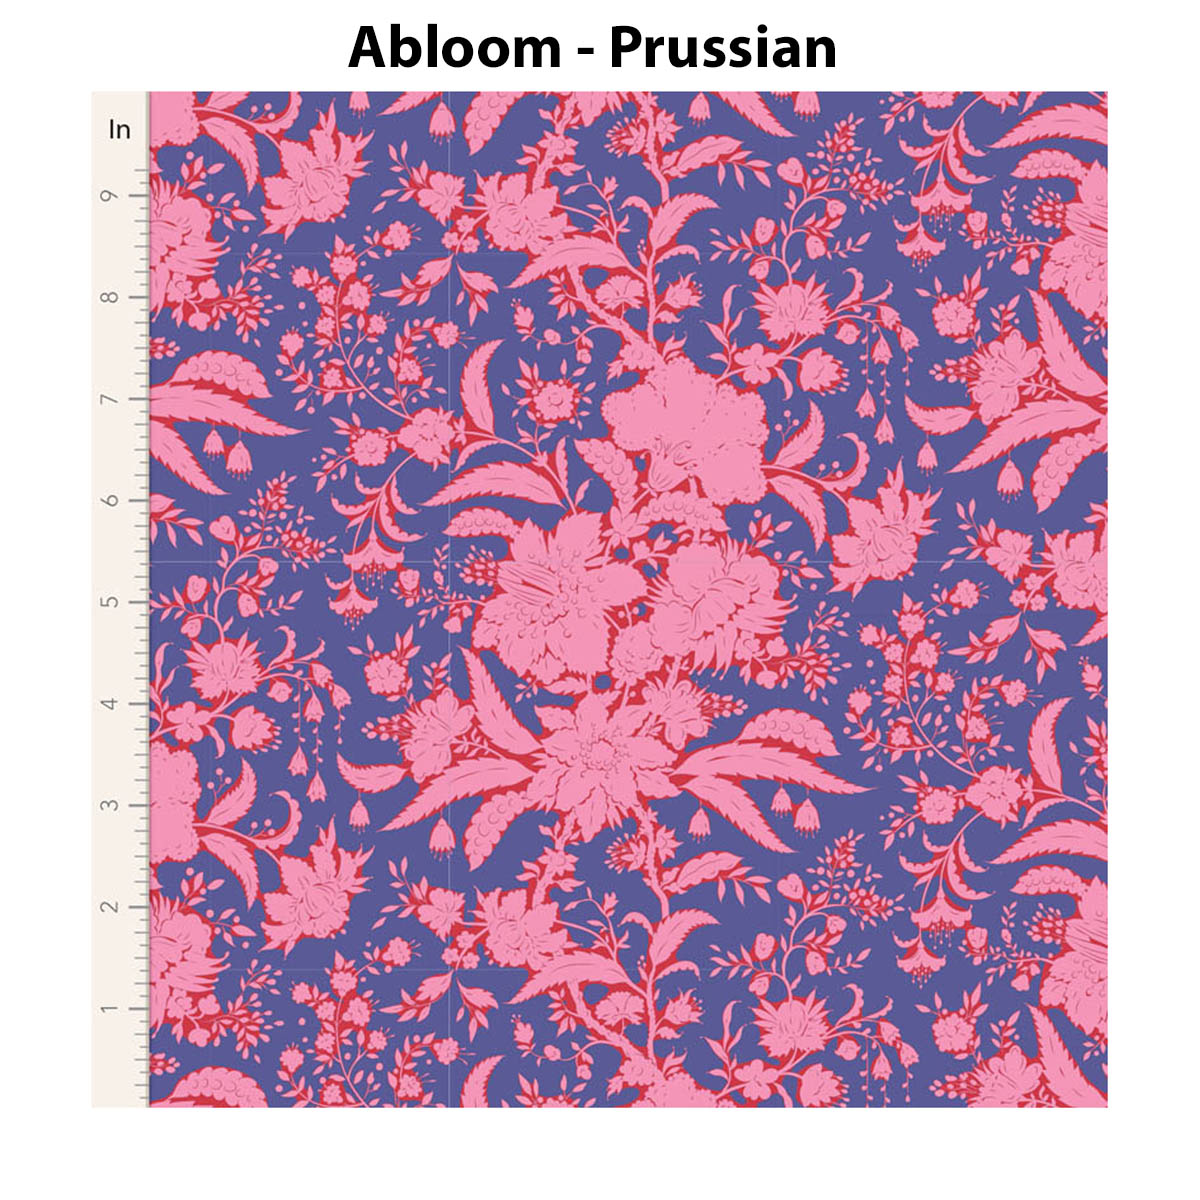 Tilda - BLOOMSVILLE COLLECTION - Abloom - Prussian